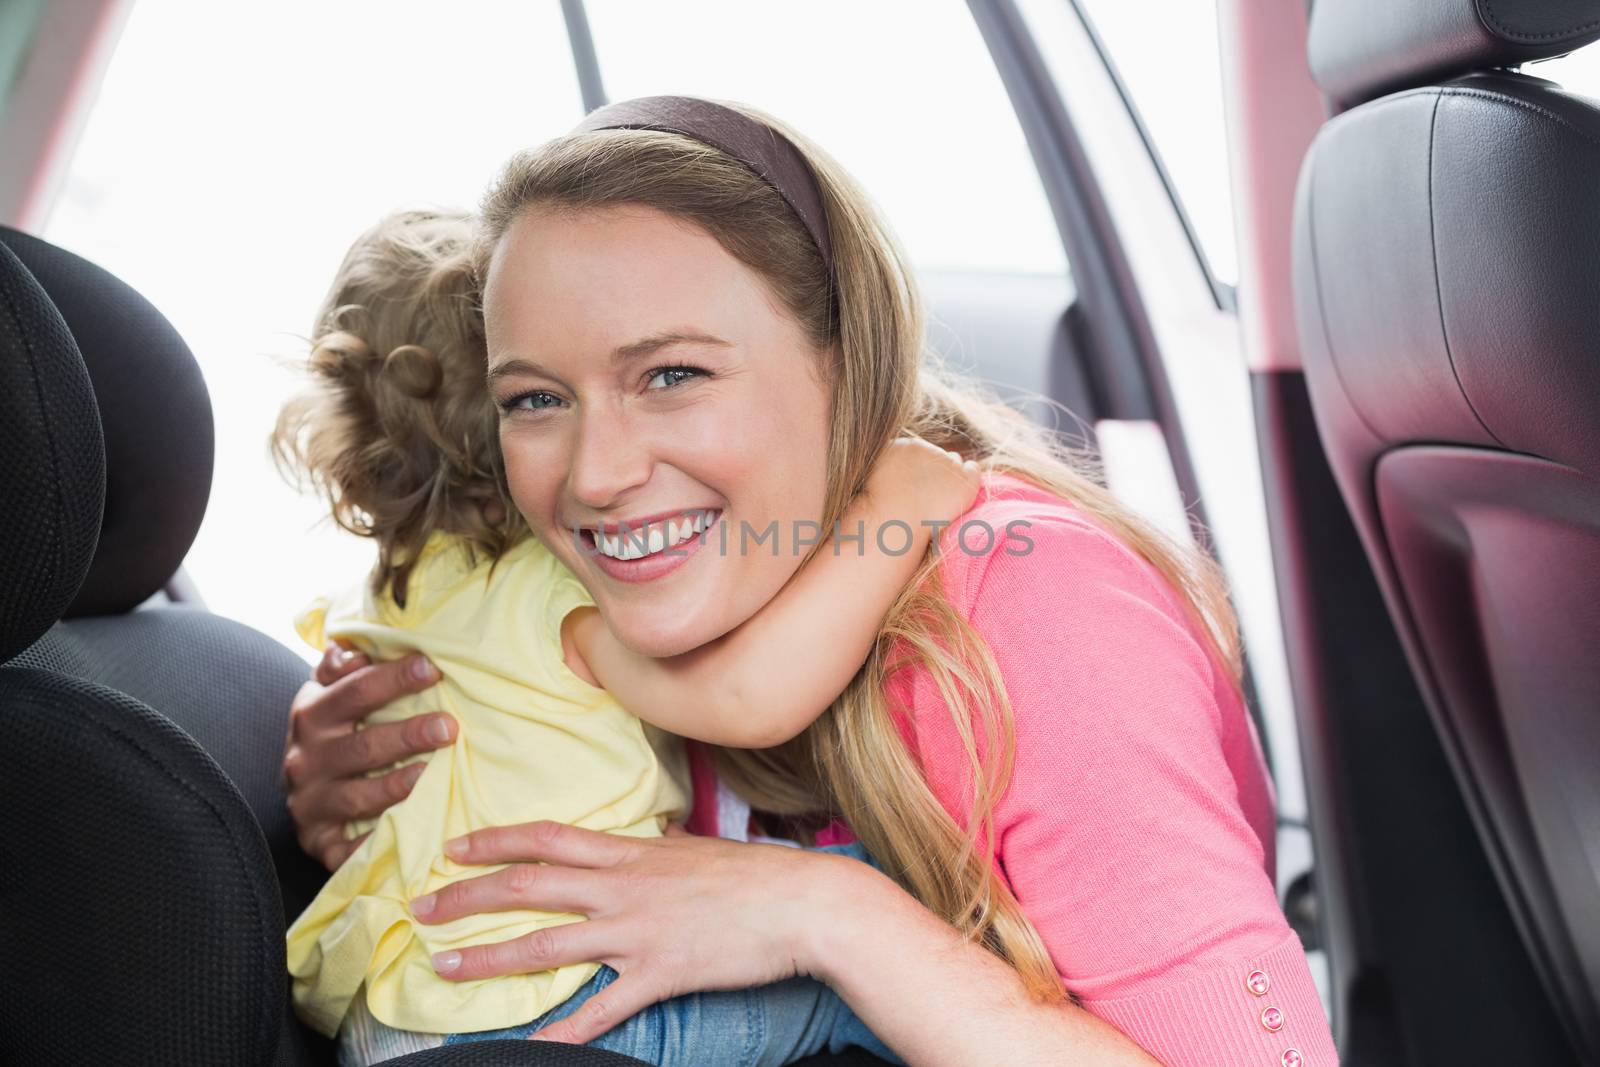 Mother securing her baby in the car seat by Wavebreakmedia